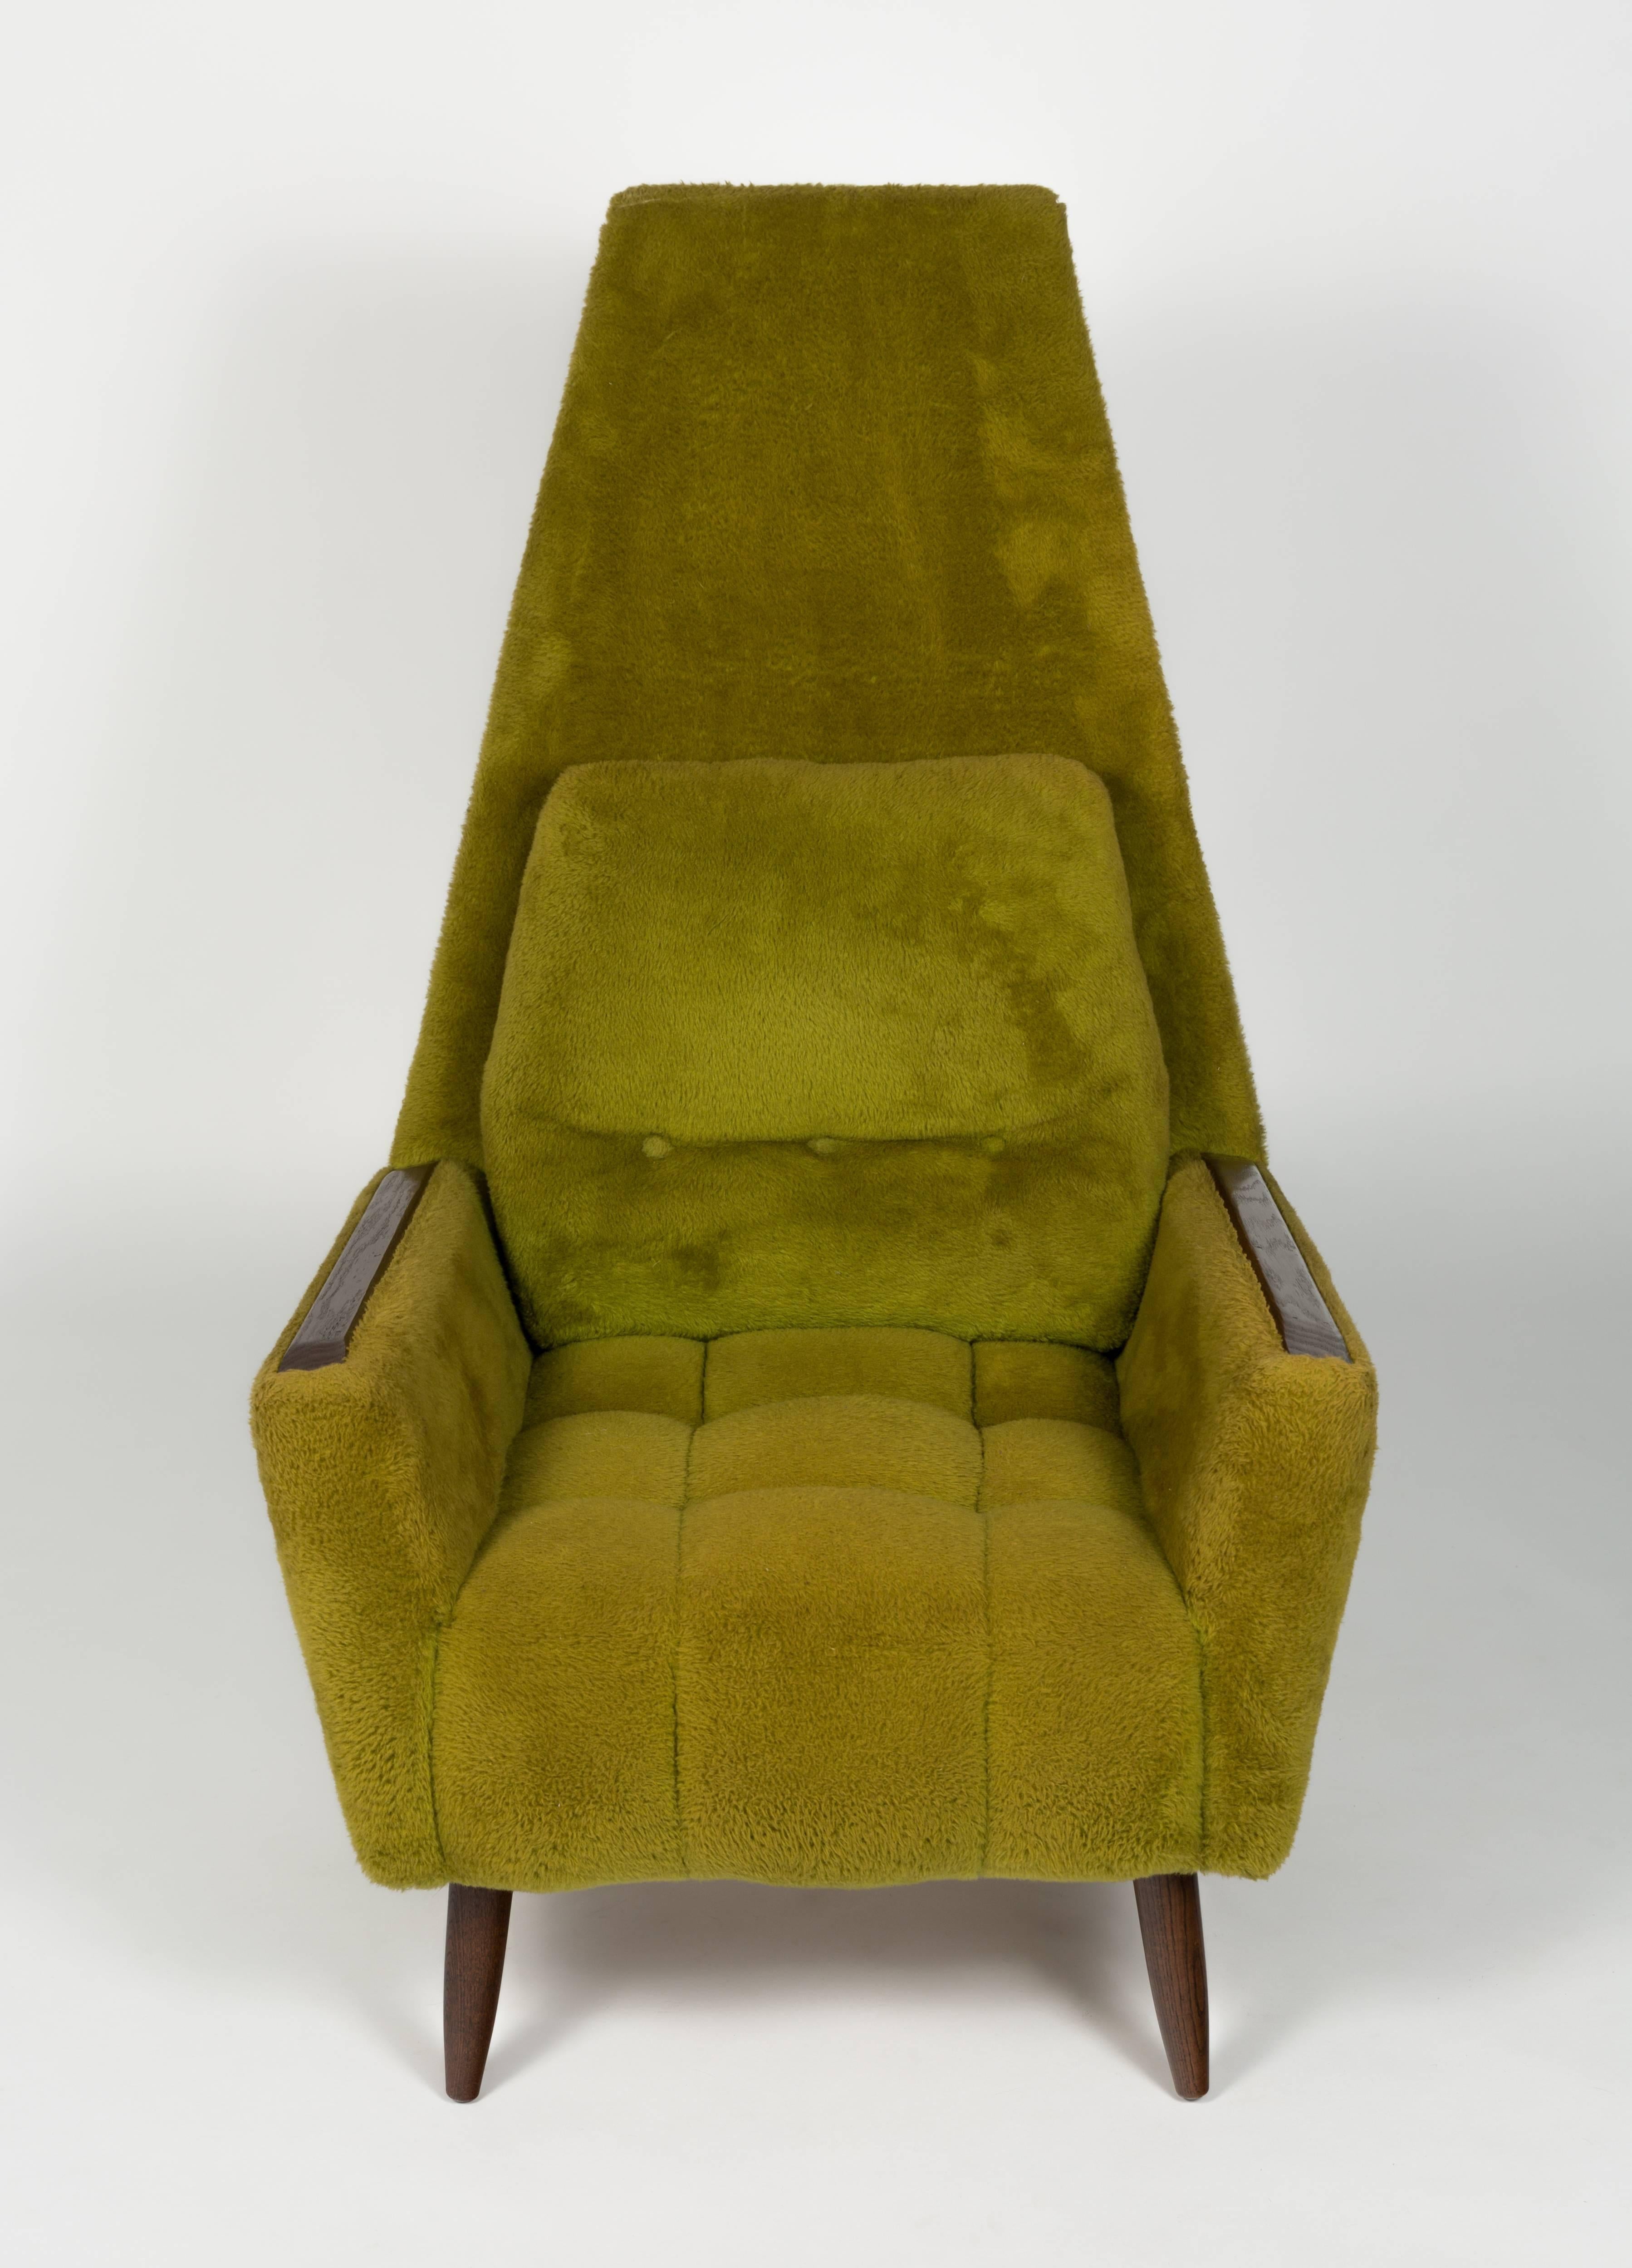 Pair of 1950s high back lounge chair in the Kagan or Pearsall style.